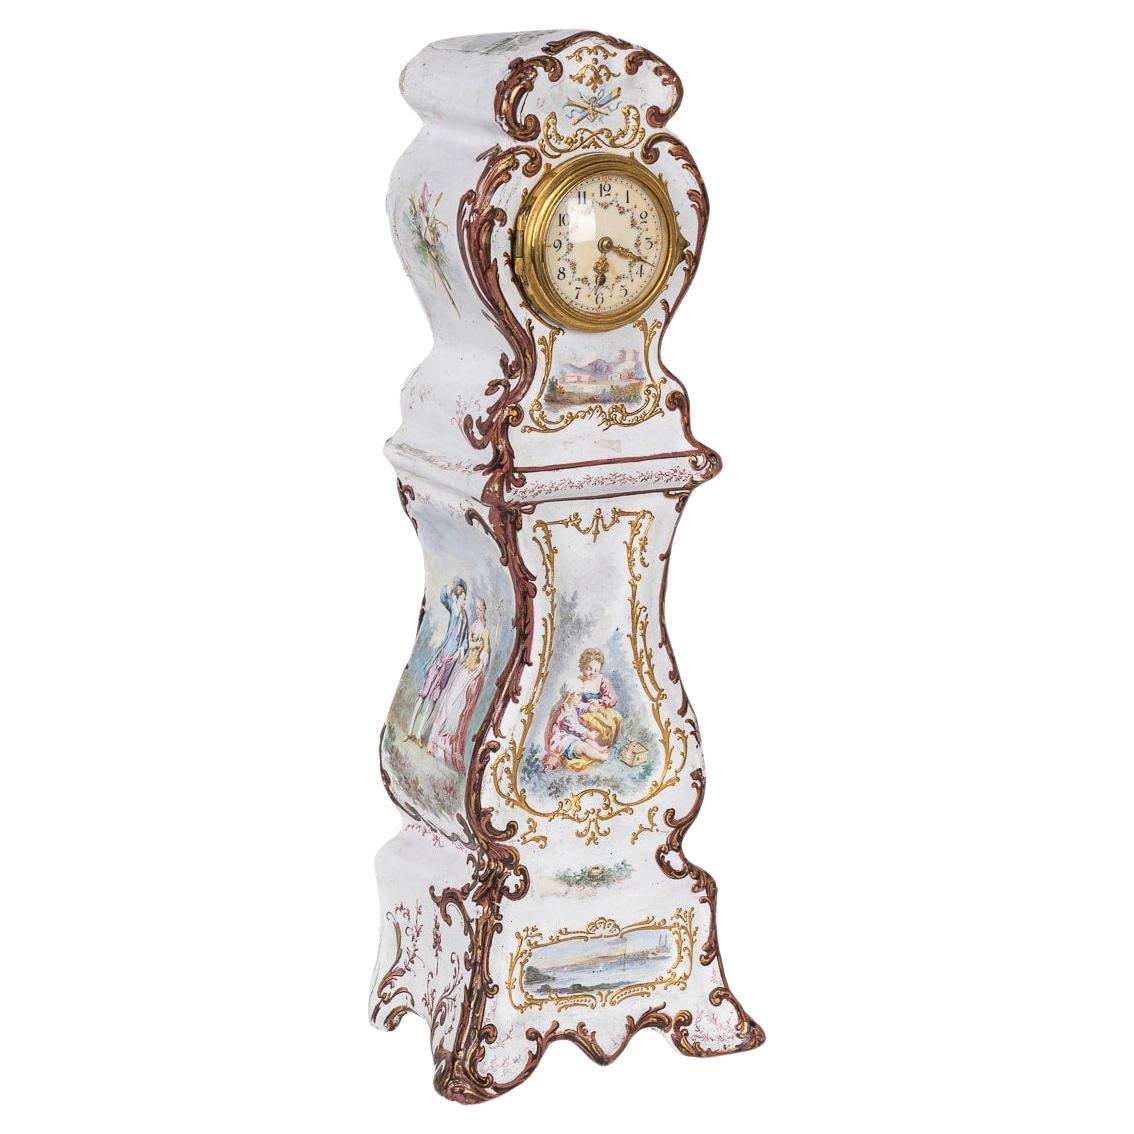 18th Century English Enamel Table Clock With Floral & Romantic Scenes c.1770 For Sale